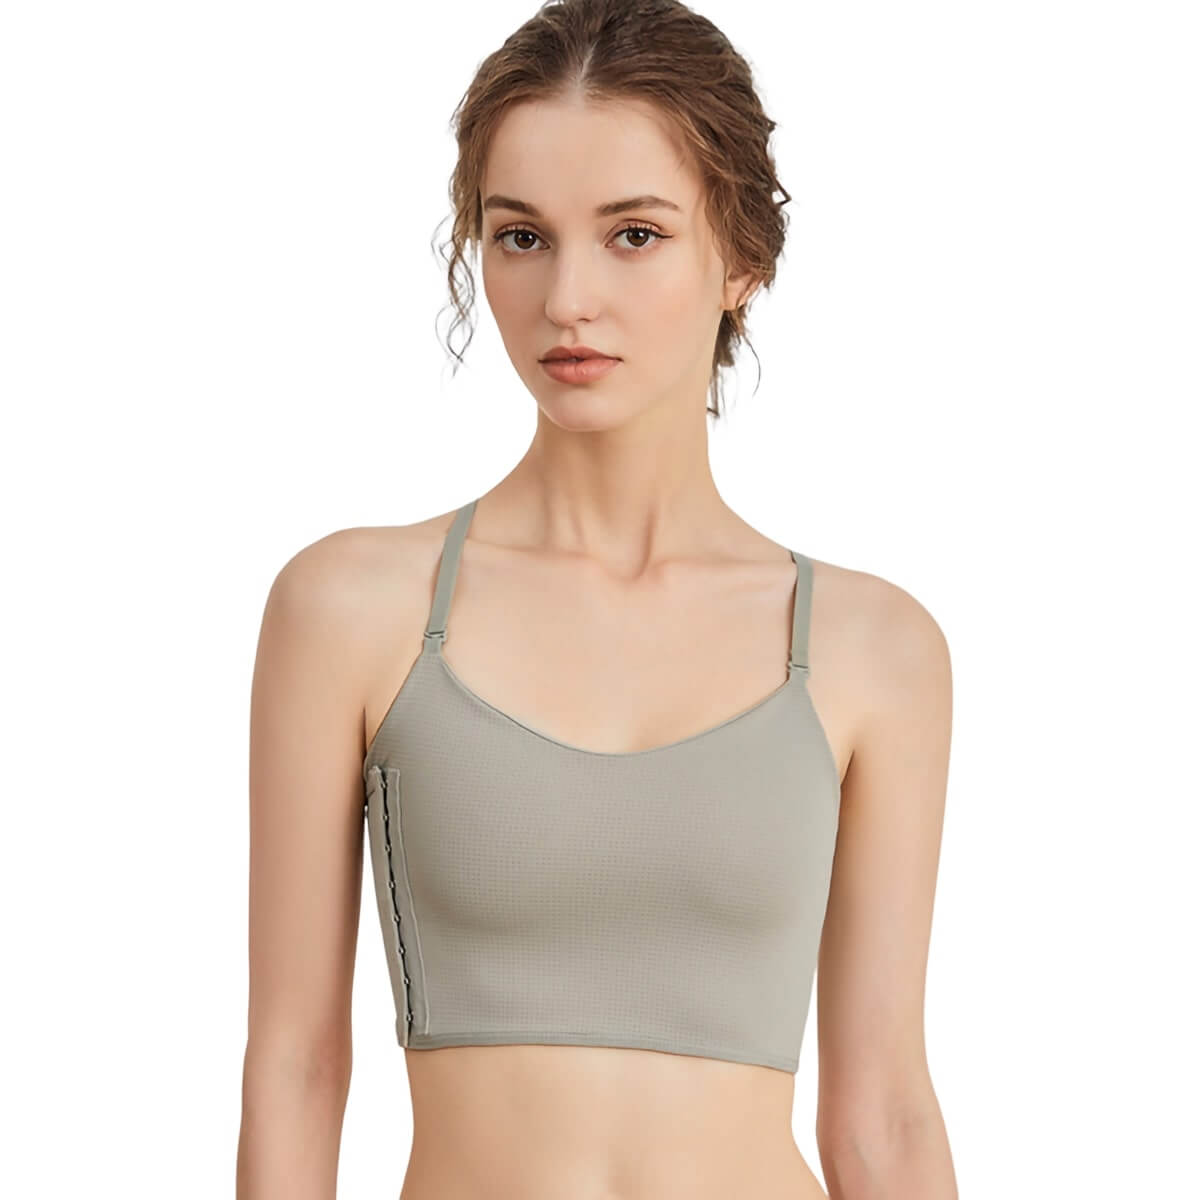 Naked Feeling Compression Bra for Binding - Grey / M